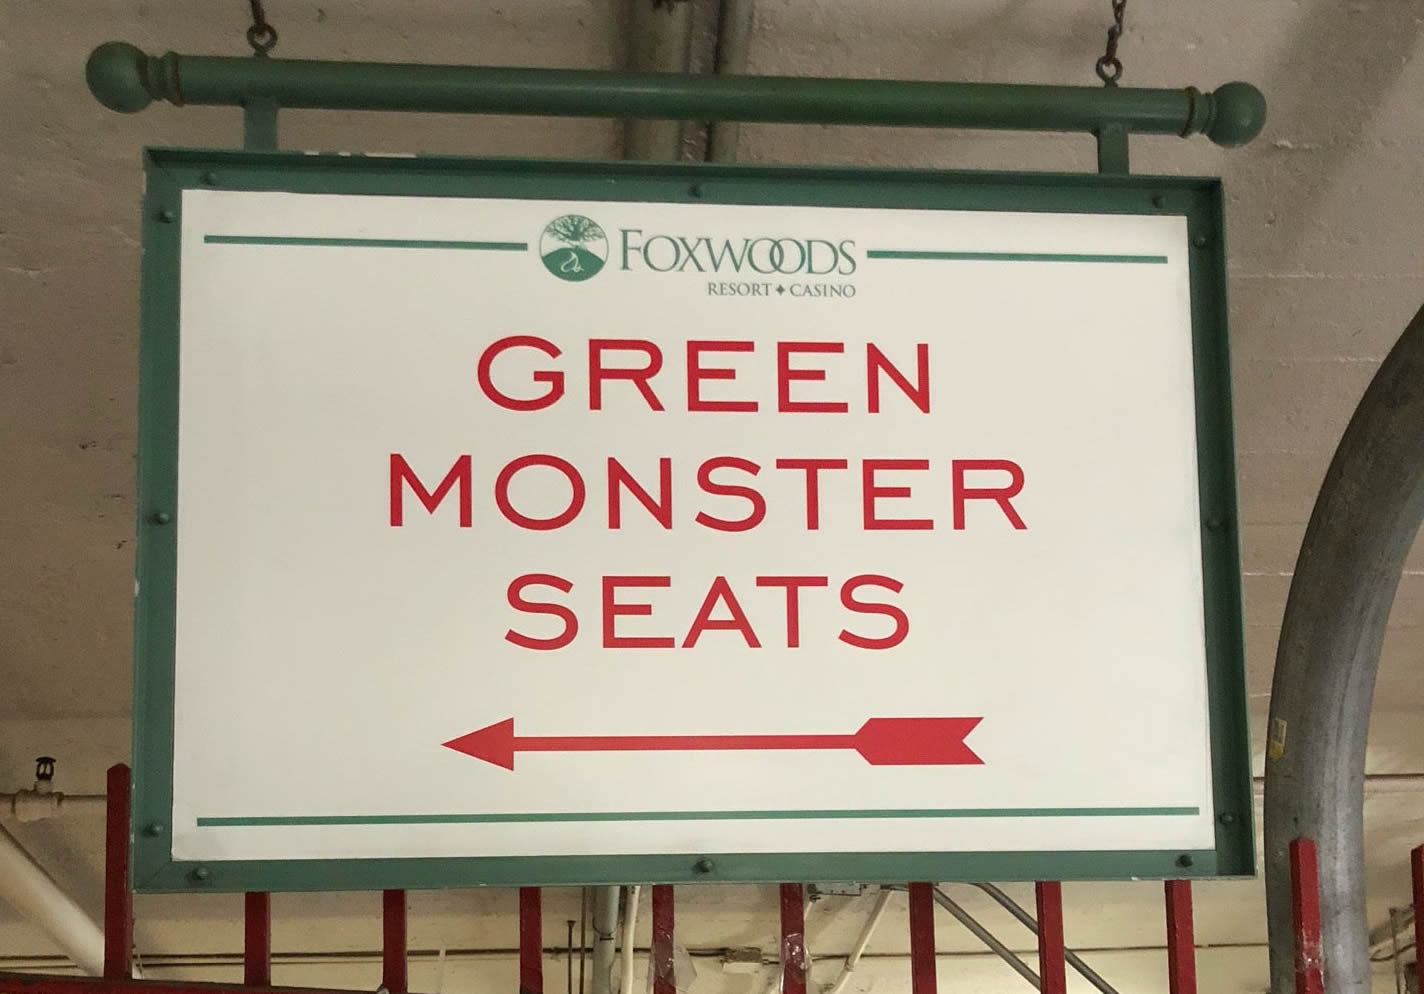 The view from the Monster seats at Fenway - ESPN - SweetSpot- ESPN